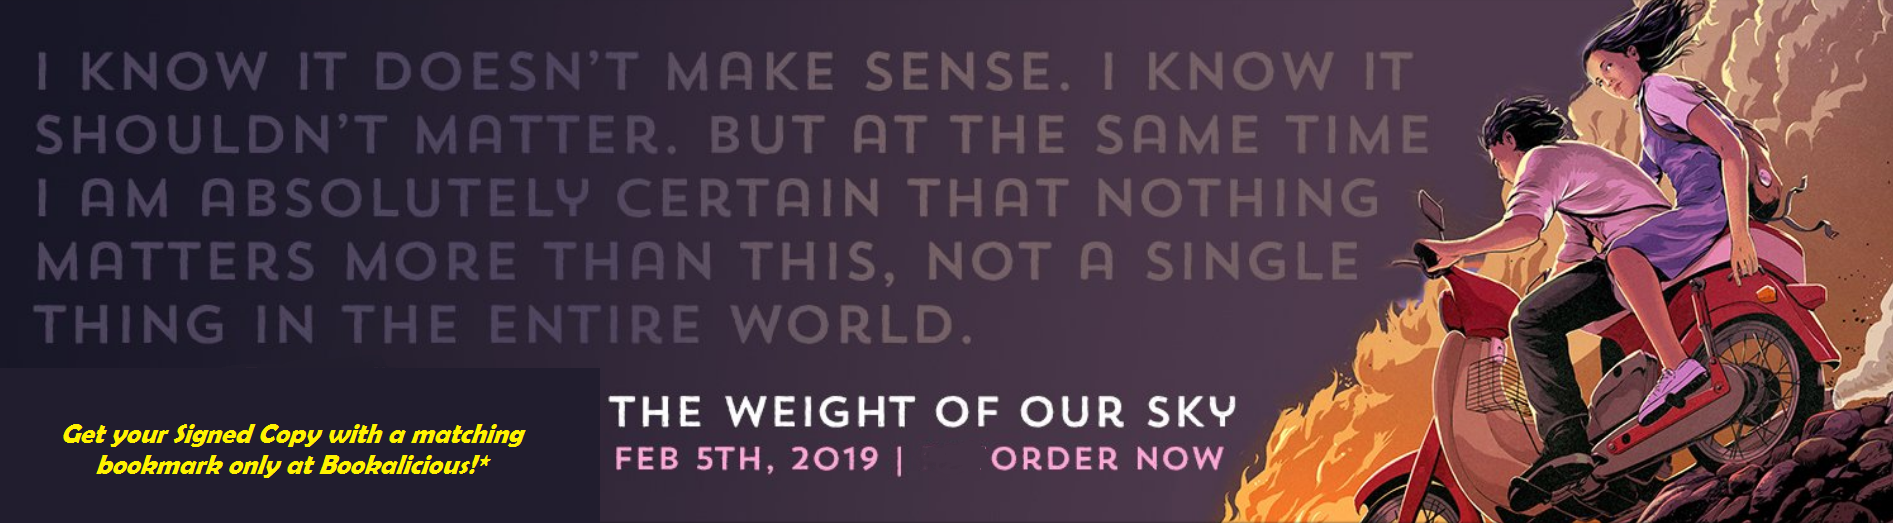 weight of our sky.png